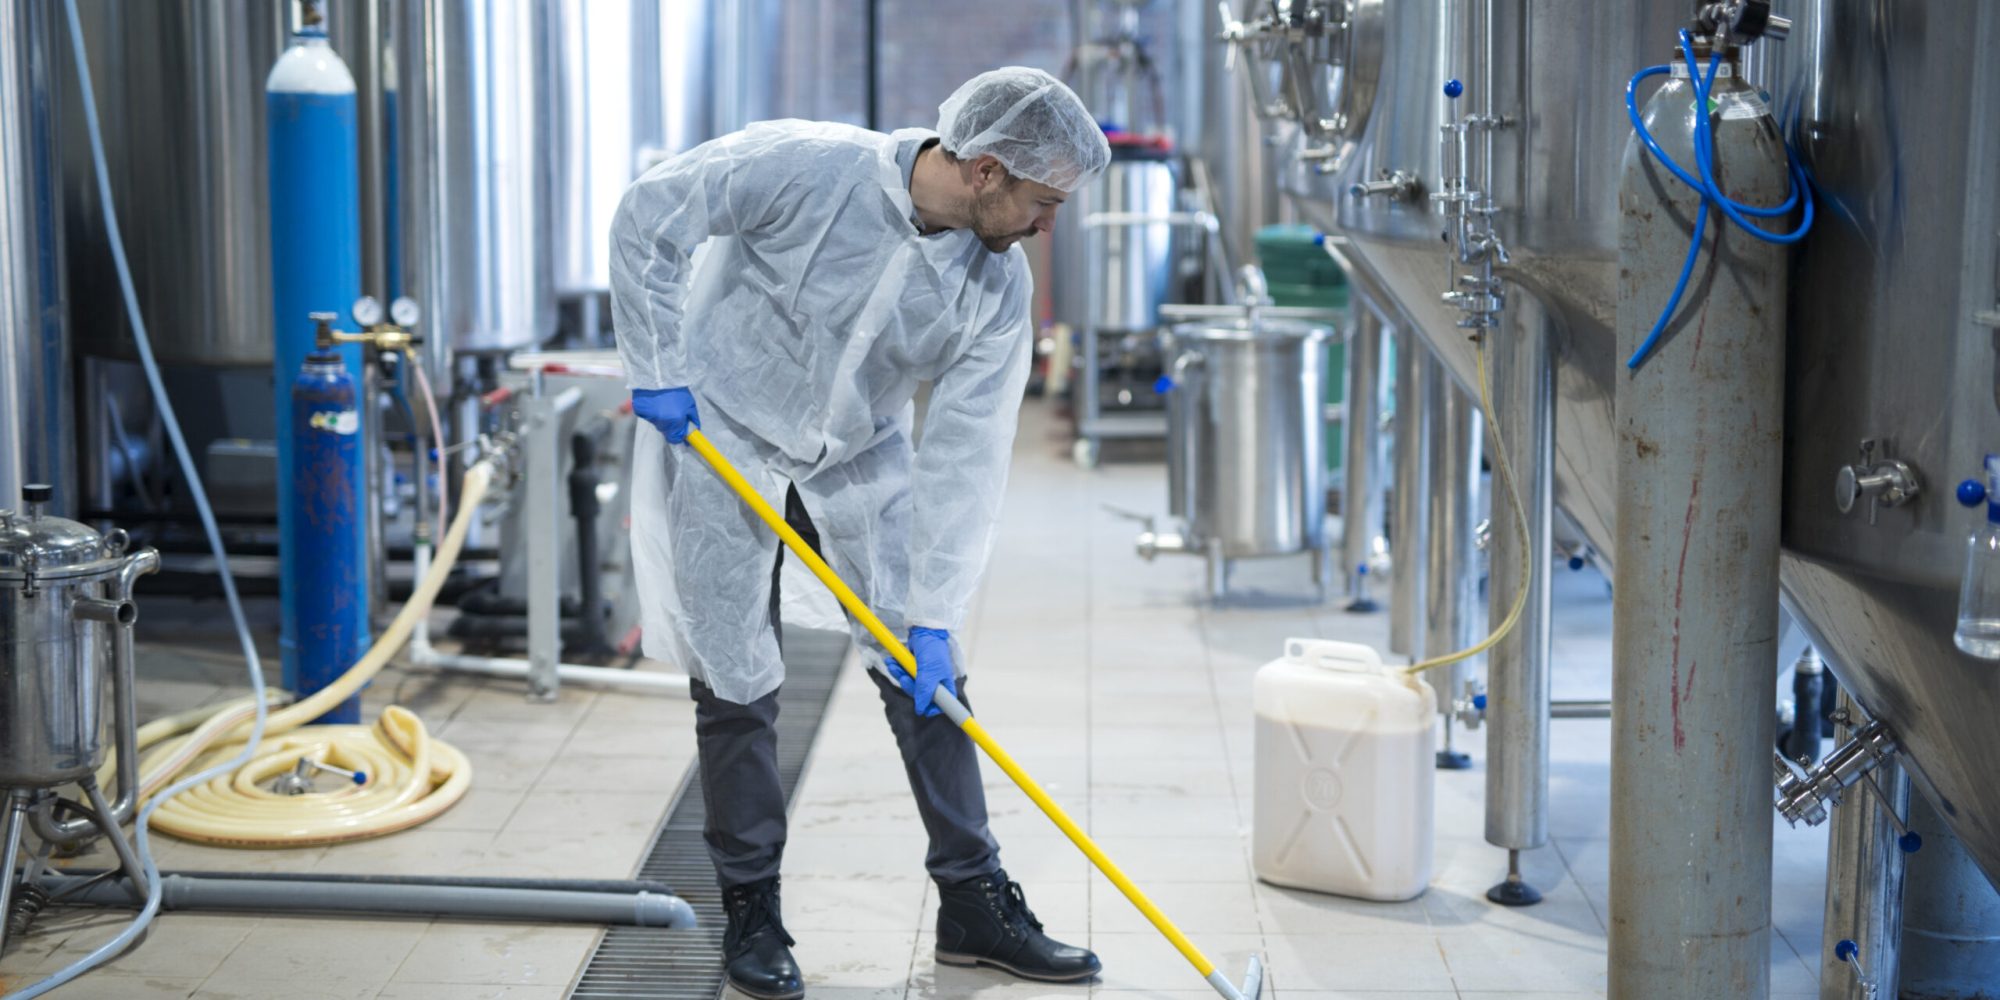 Professional industrial cleaner in protective uniform cleaning floor of food processing plant. Cleaning services.